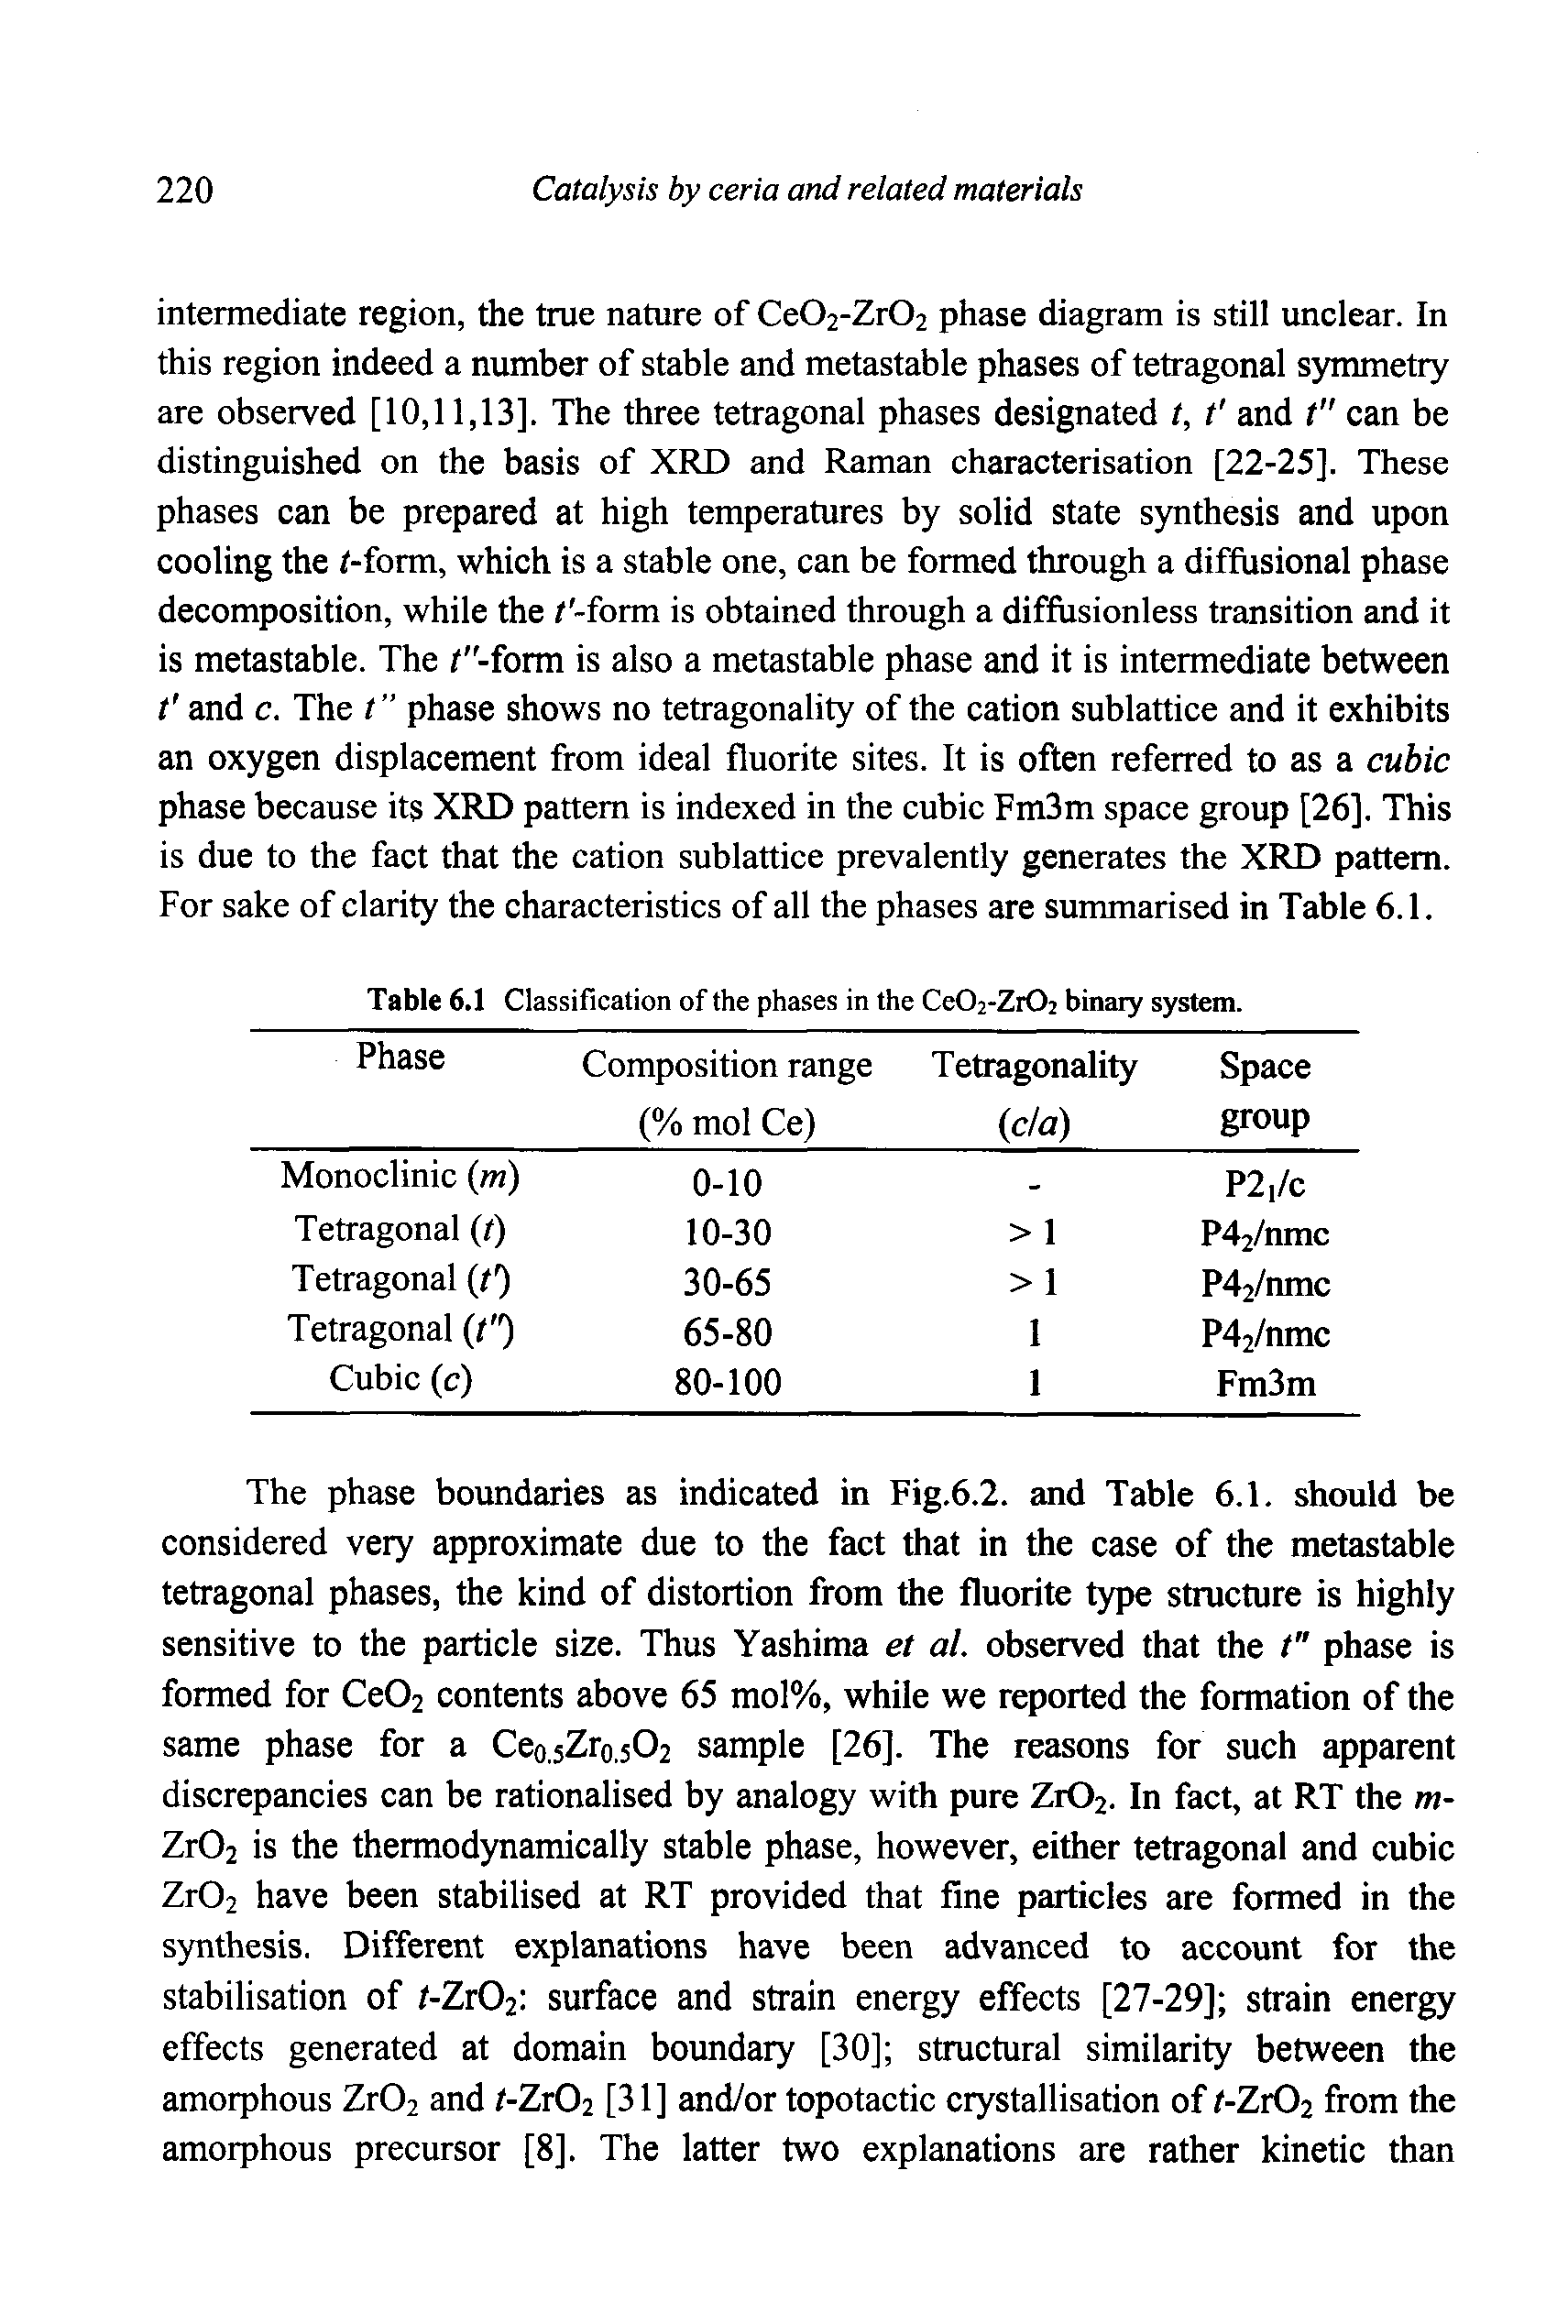 Table 6.1 Classification of the phases in the Ce02-Zr02 binary system.